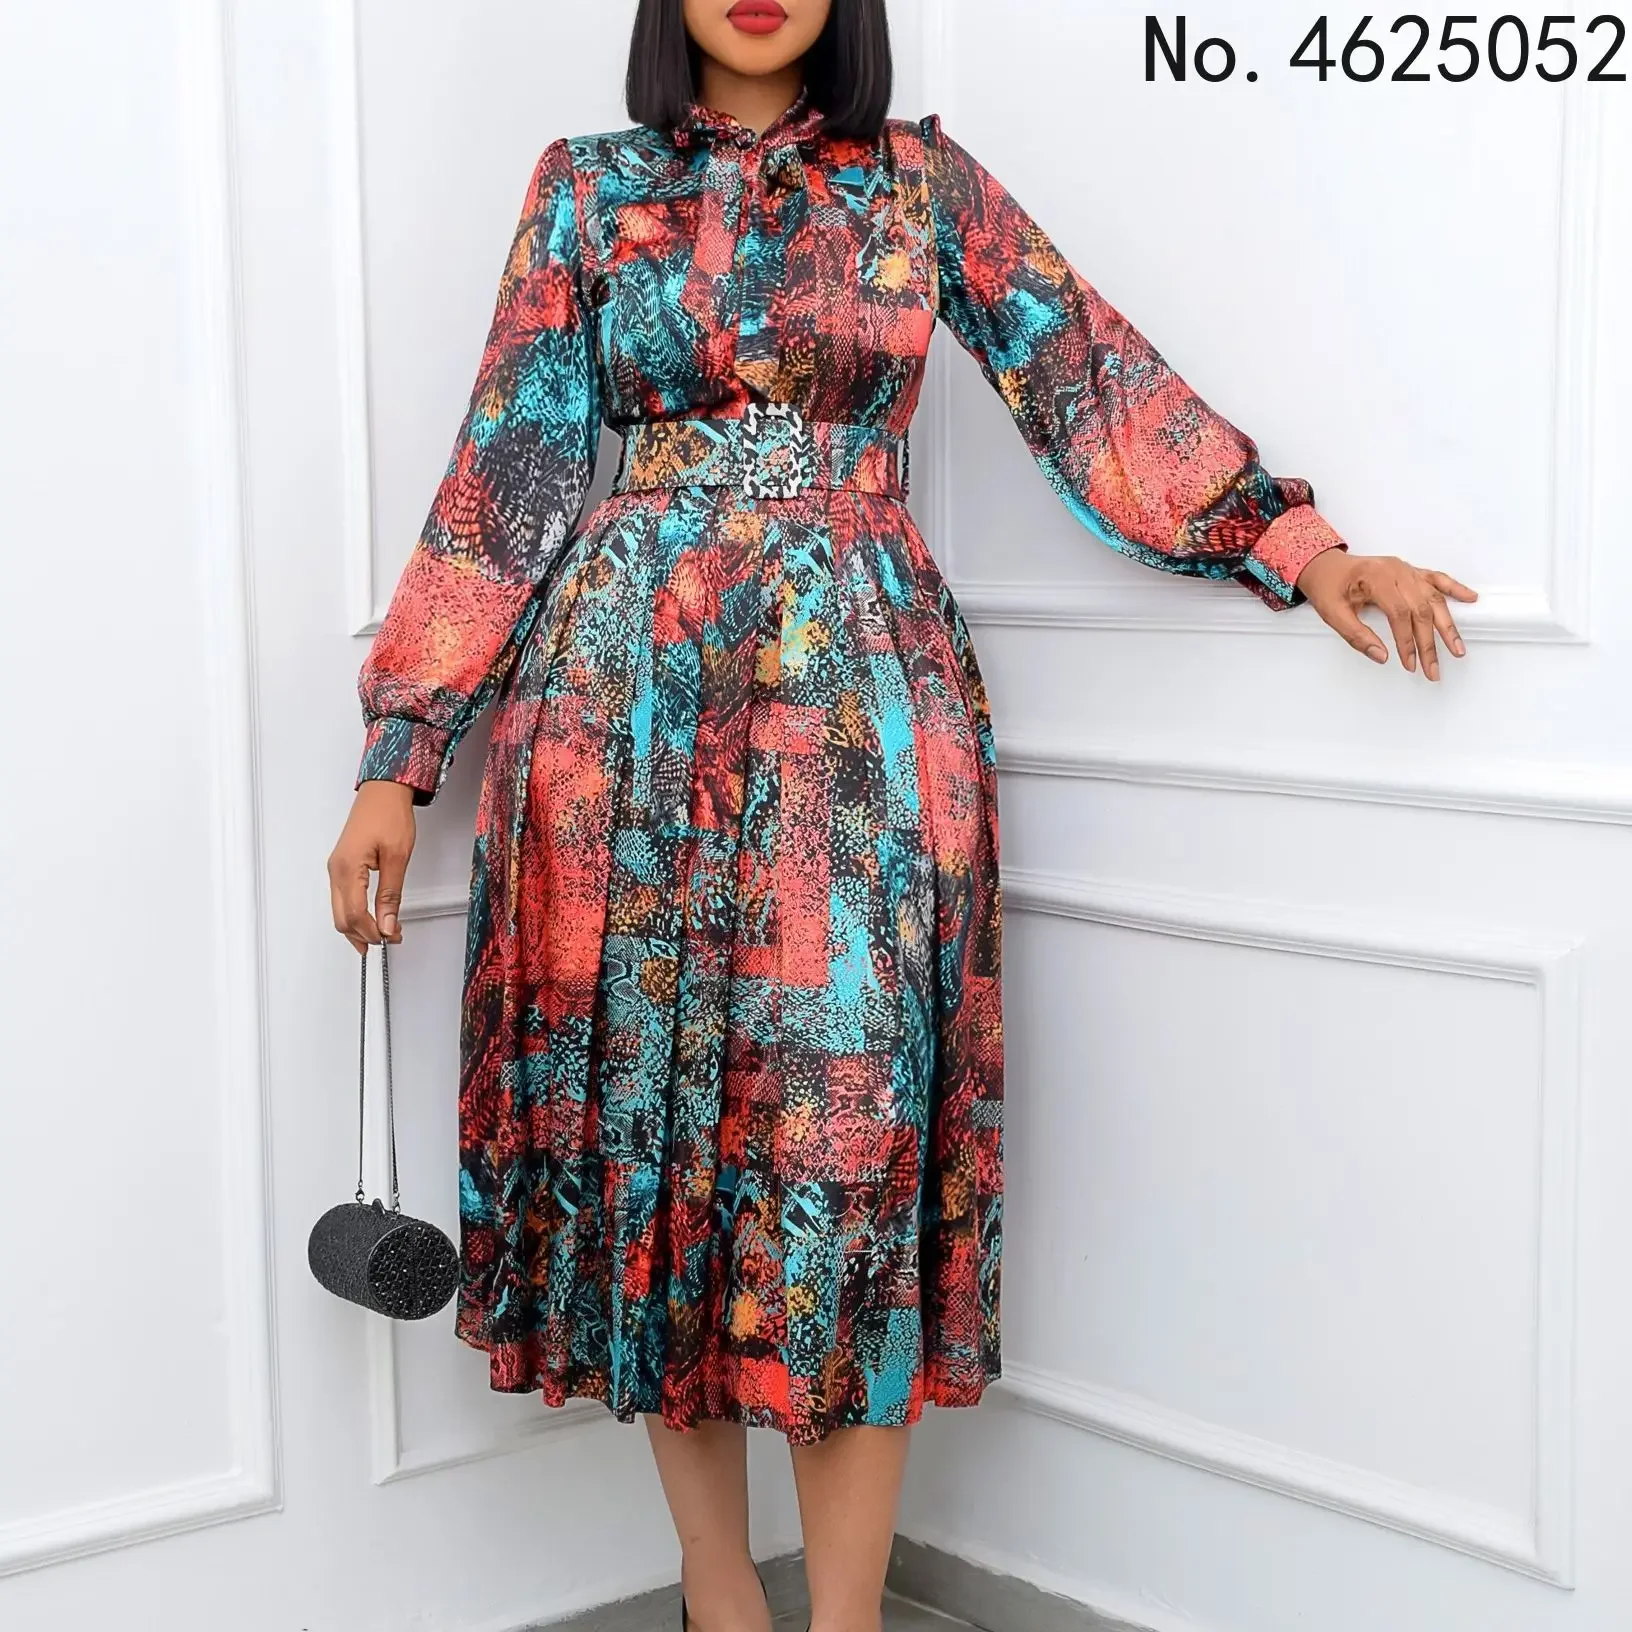 

Women Printed A Line Dresses Long Lantern Sleeves with Bowtie Vintage Retro Pleated Modest African Ladies Spring Classy Elegant